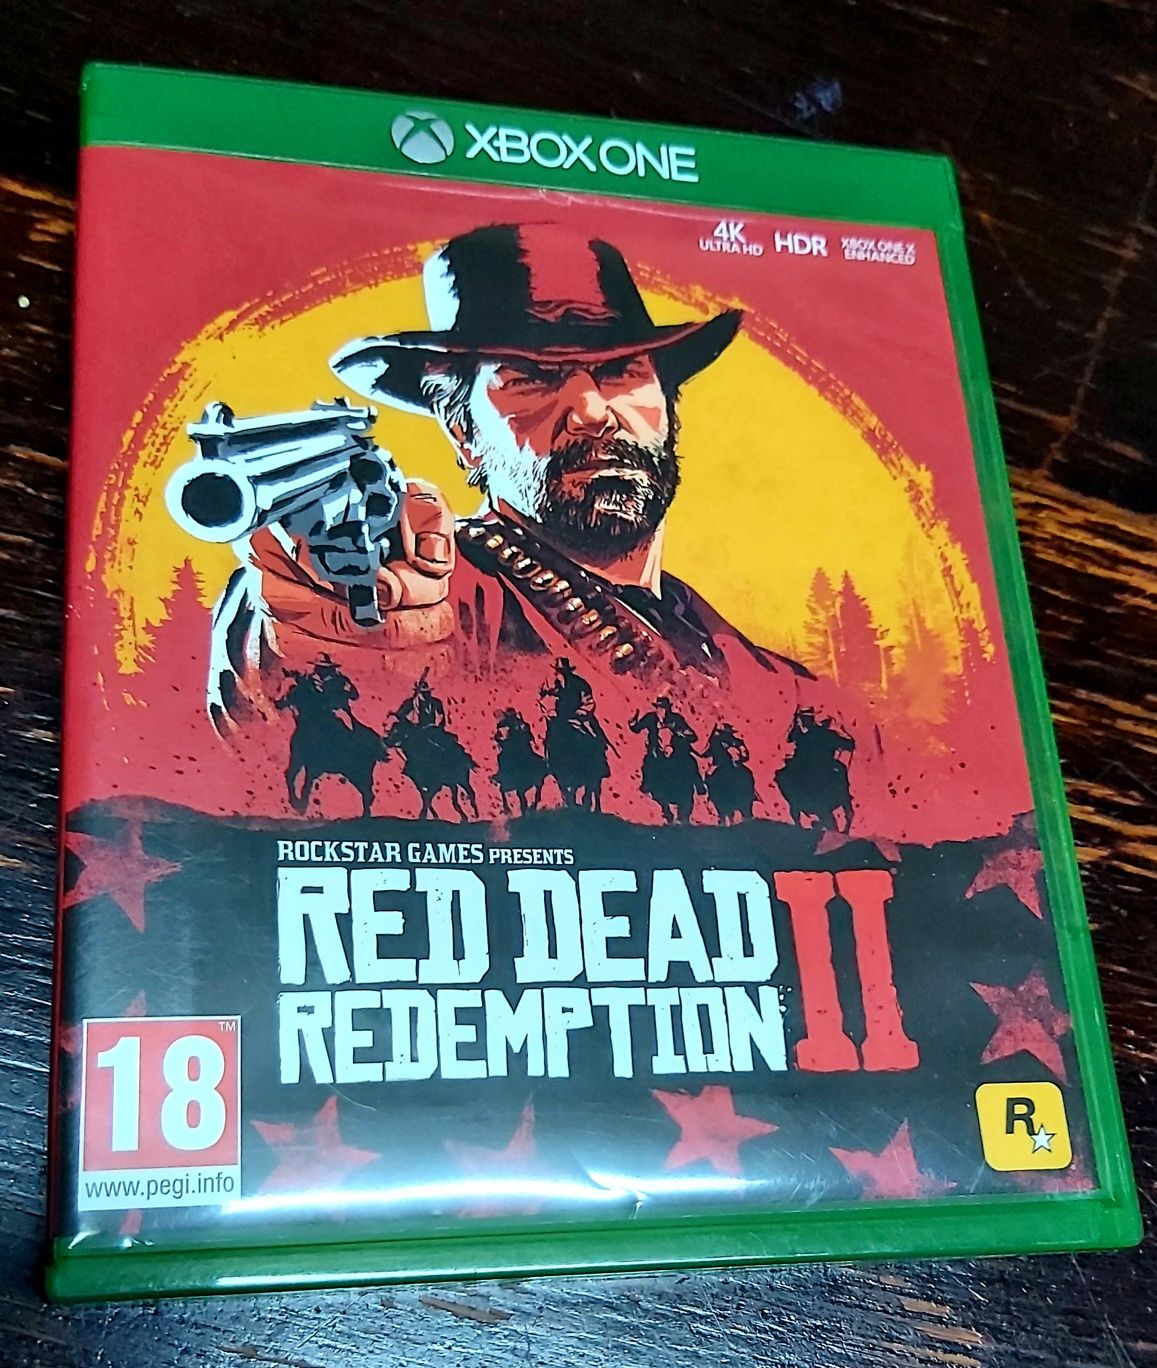 Red Dead Redemption2/The Witcher3/Ryse Son Of Rome/Crew2/Nfs XBOX One